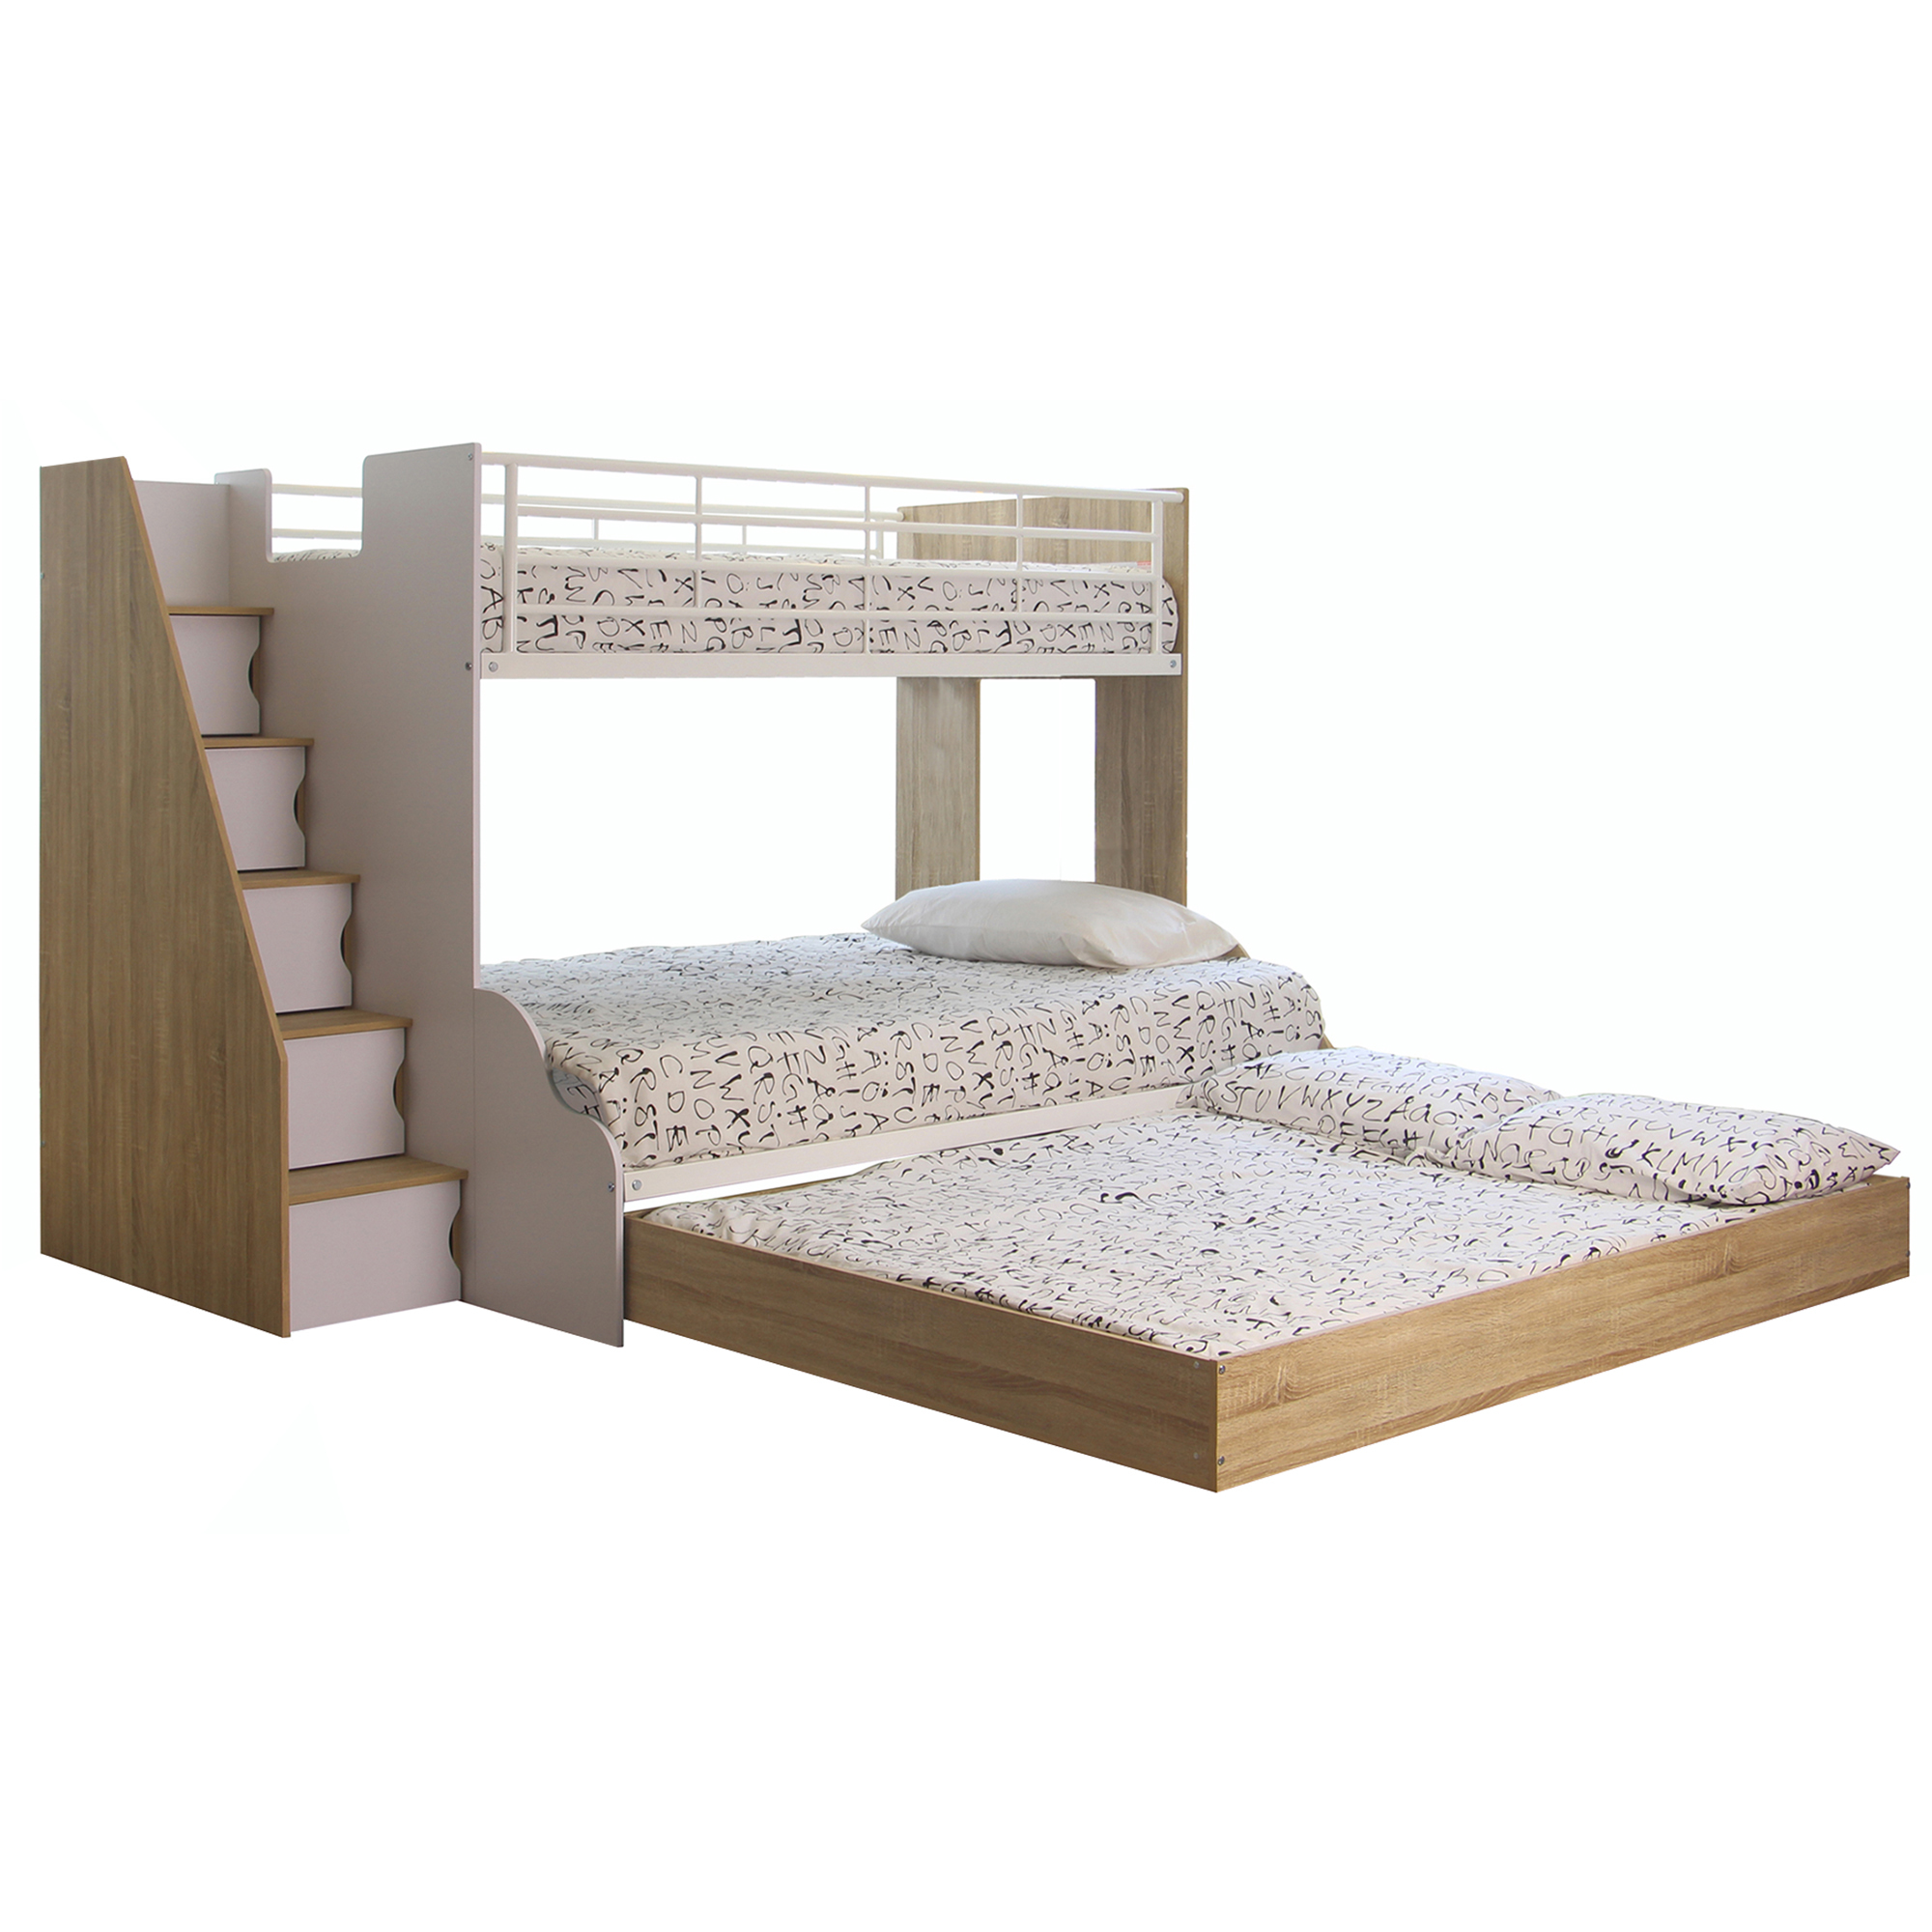 Vic Furniture Sonoma Levin Single Over, Bunk Beds That Sleep 4